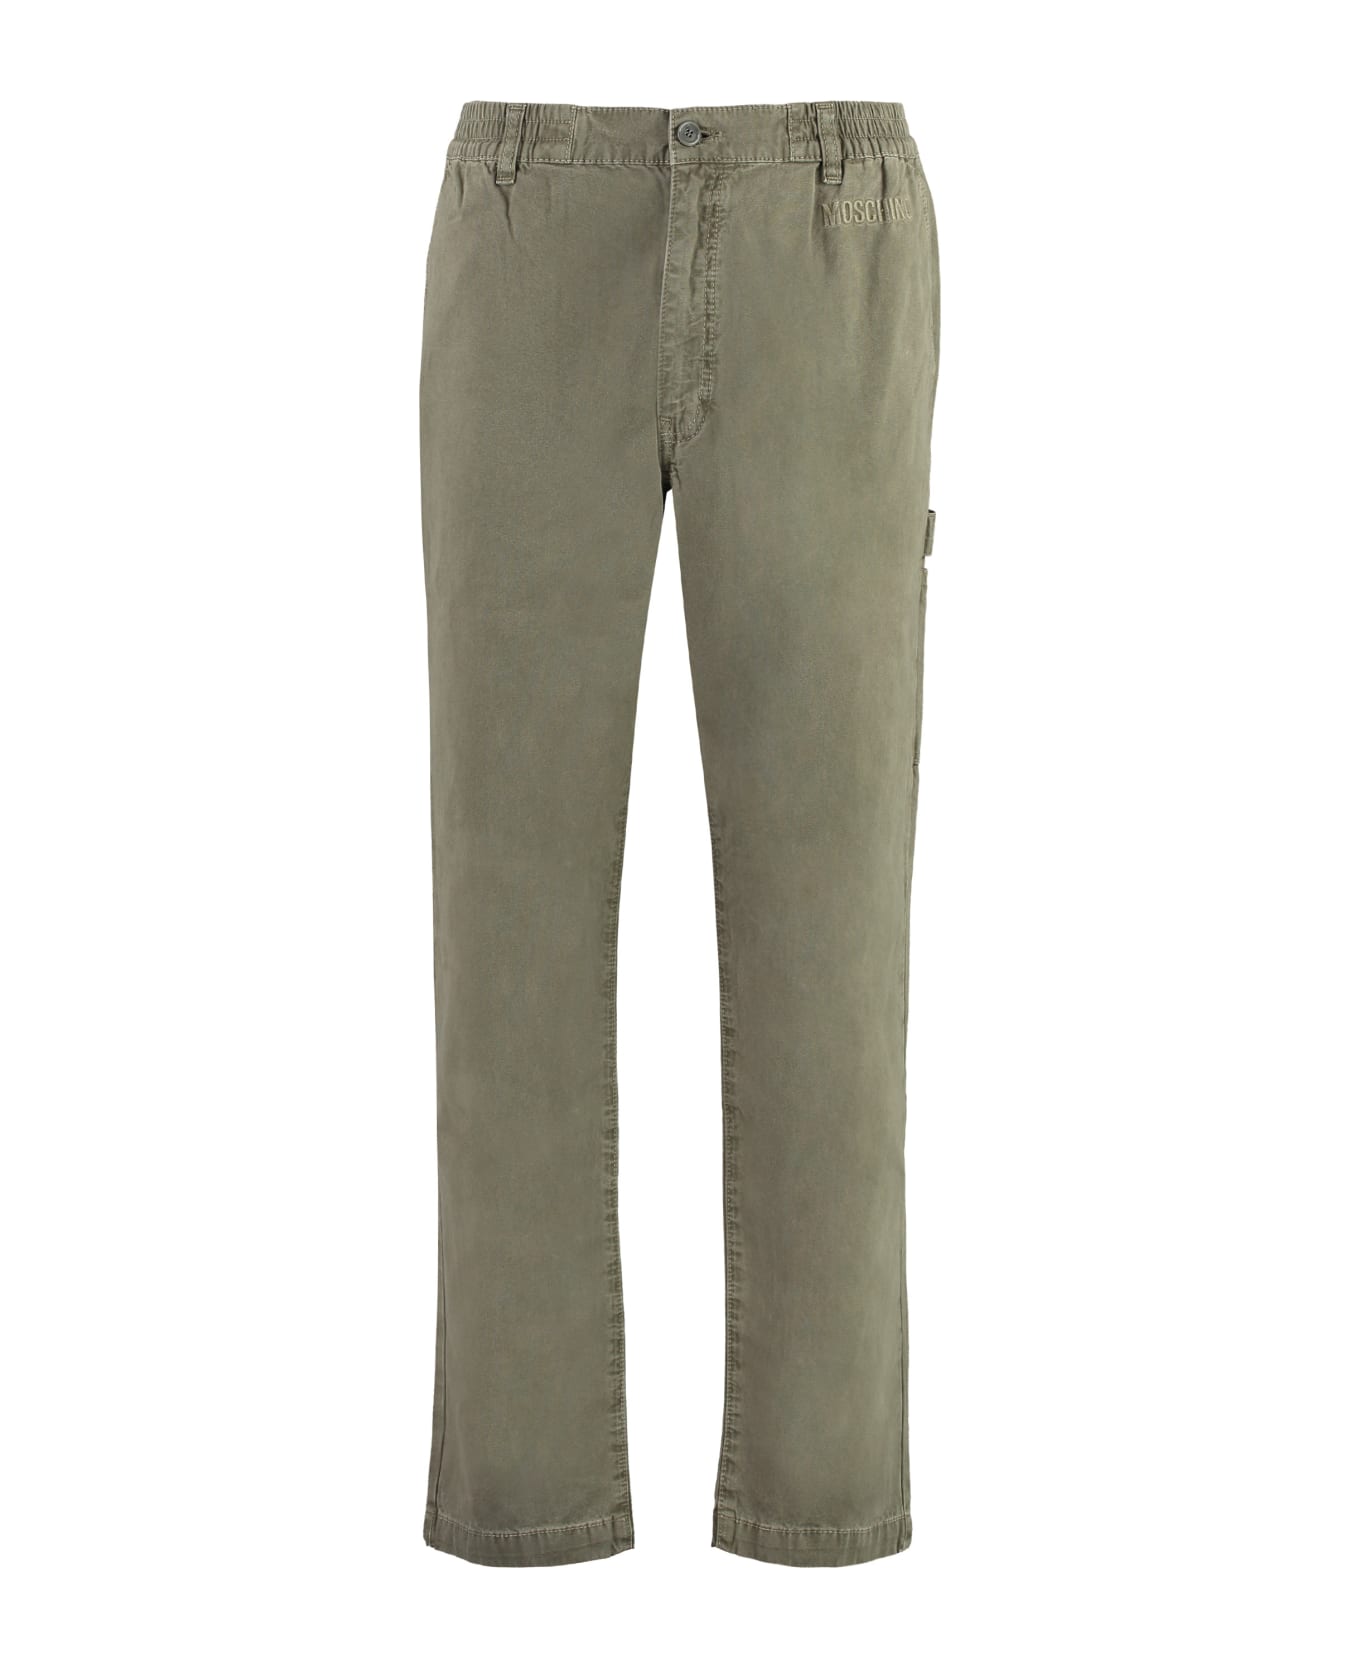 Moschino Cotton Trousers - green